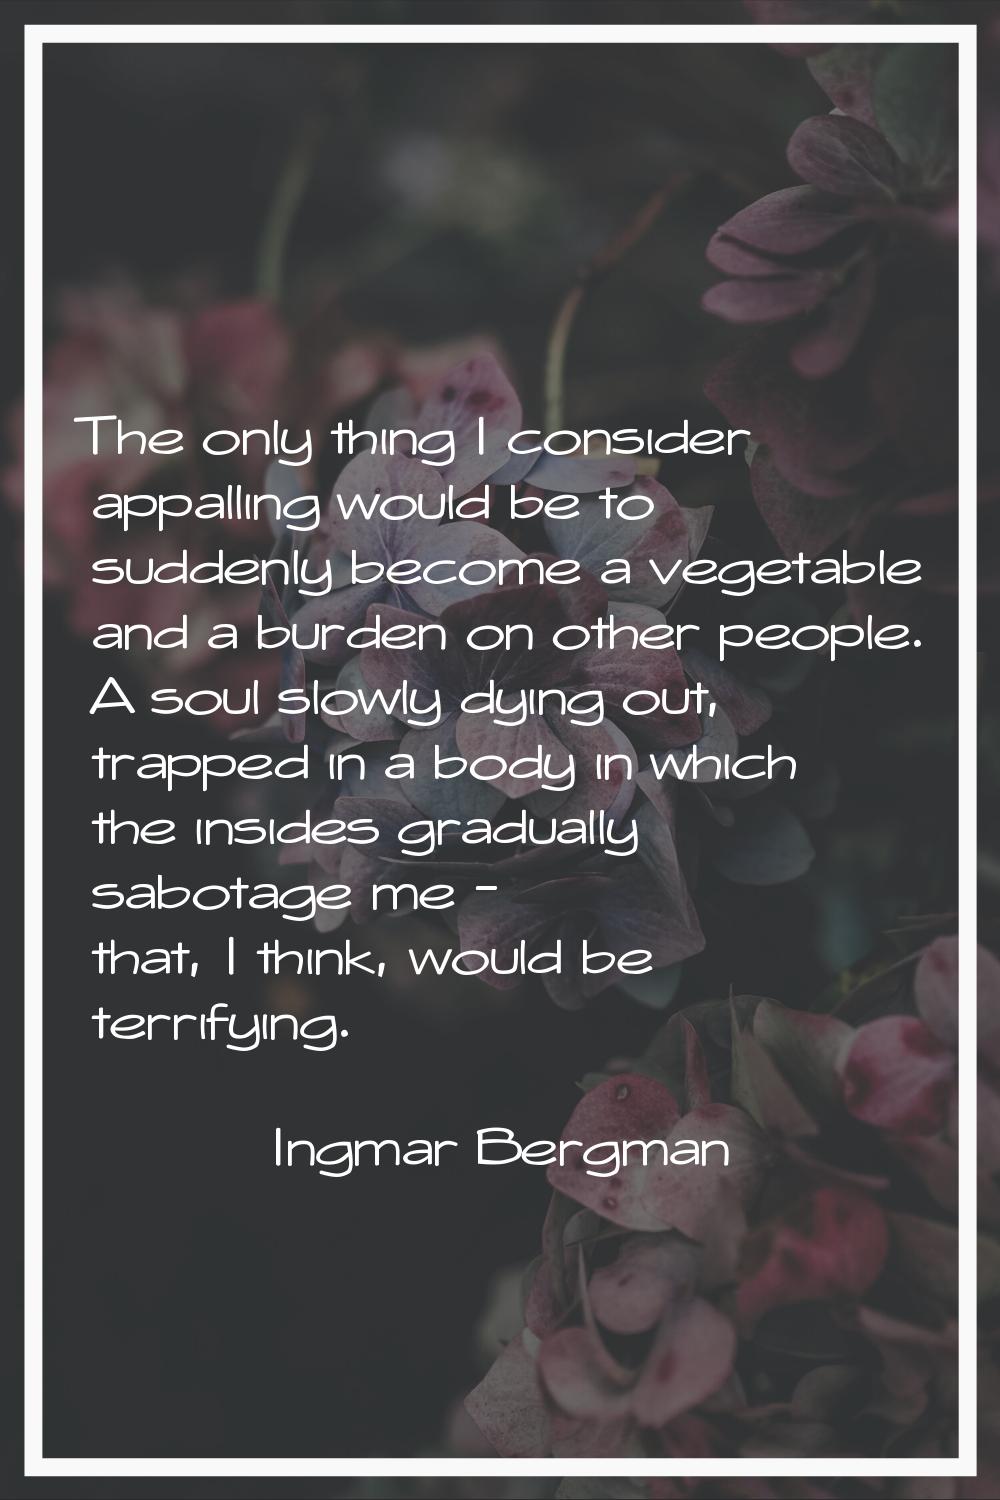 The only thing I consider appalling would be to suddenly become a vegetable and a burden on other p